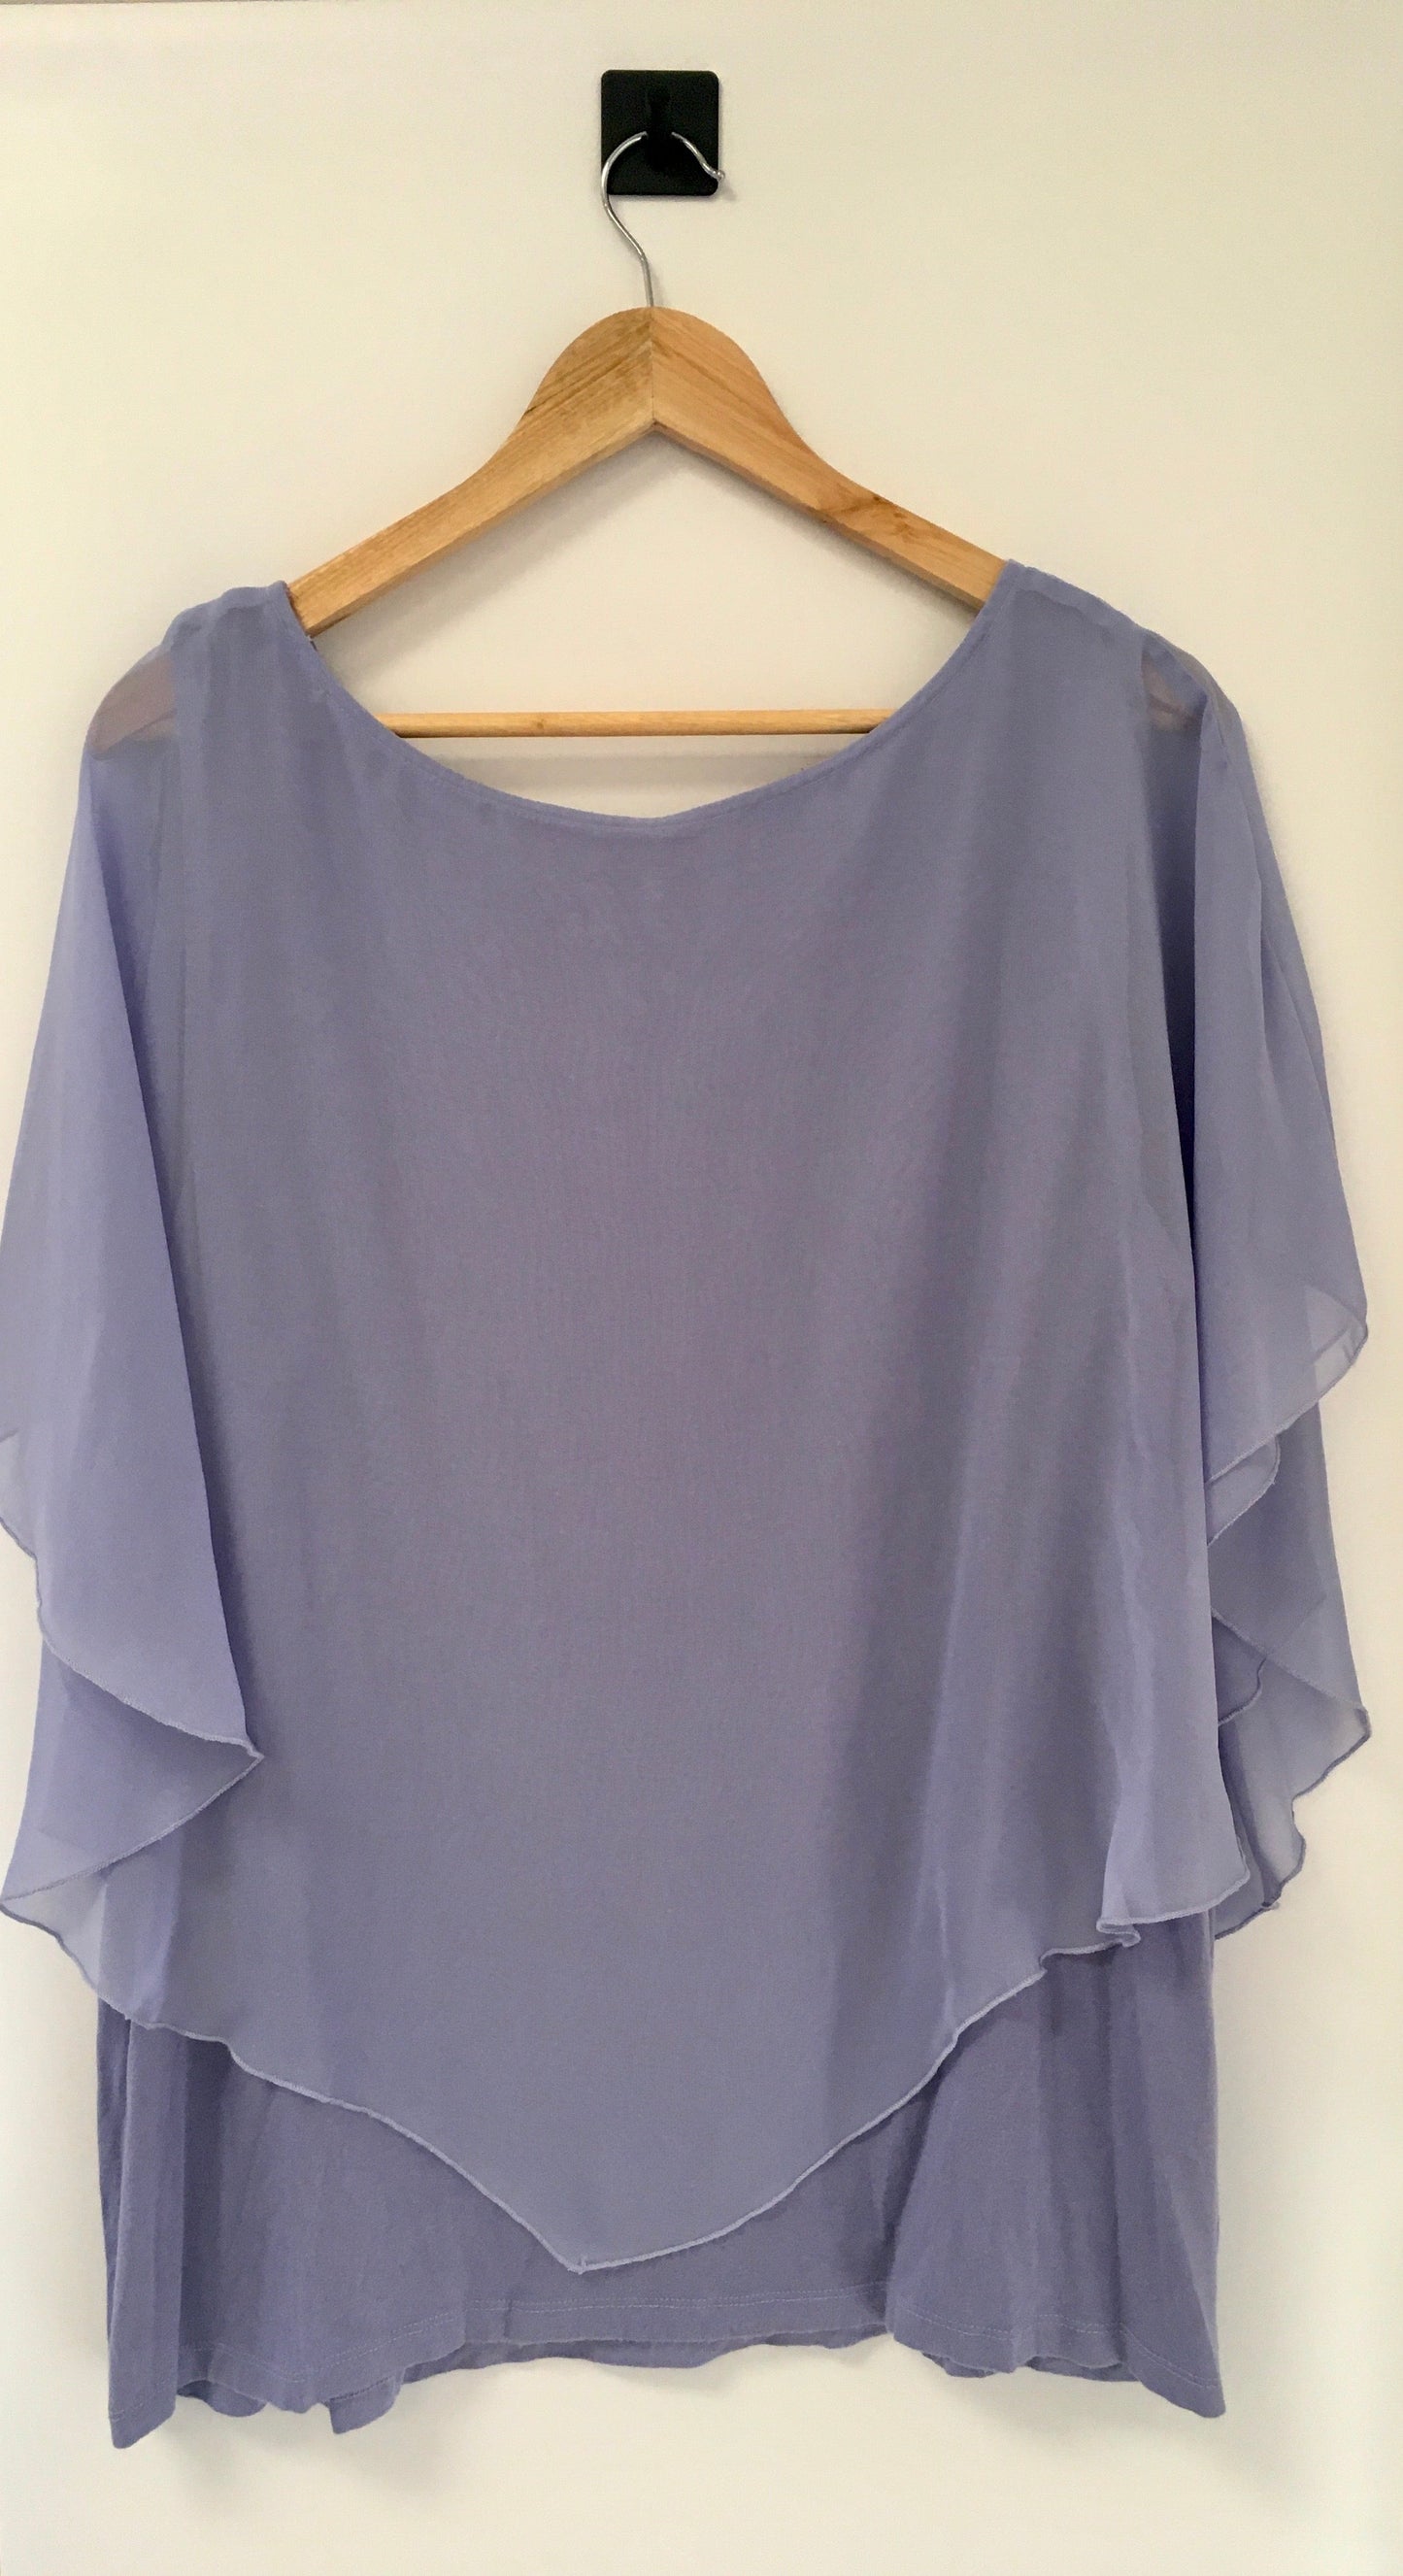 Top Short Sleeve By Alyx  Size: 2x